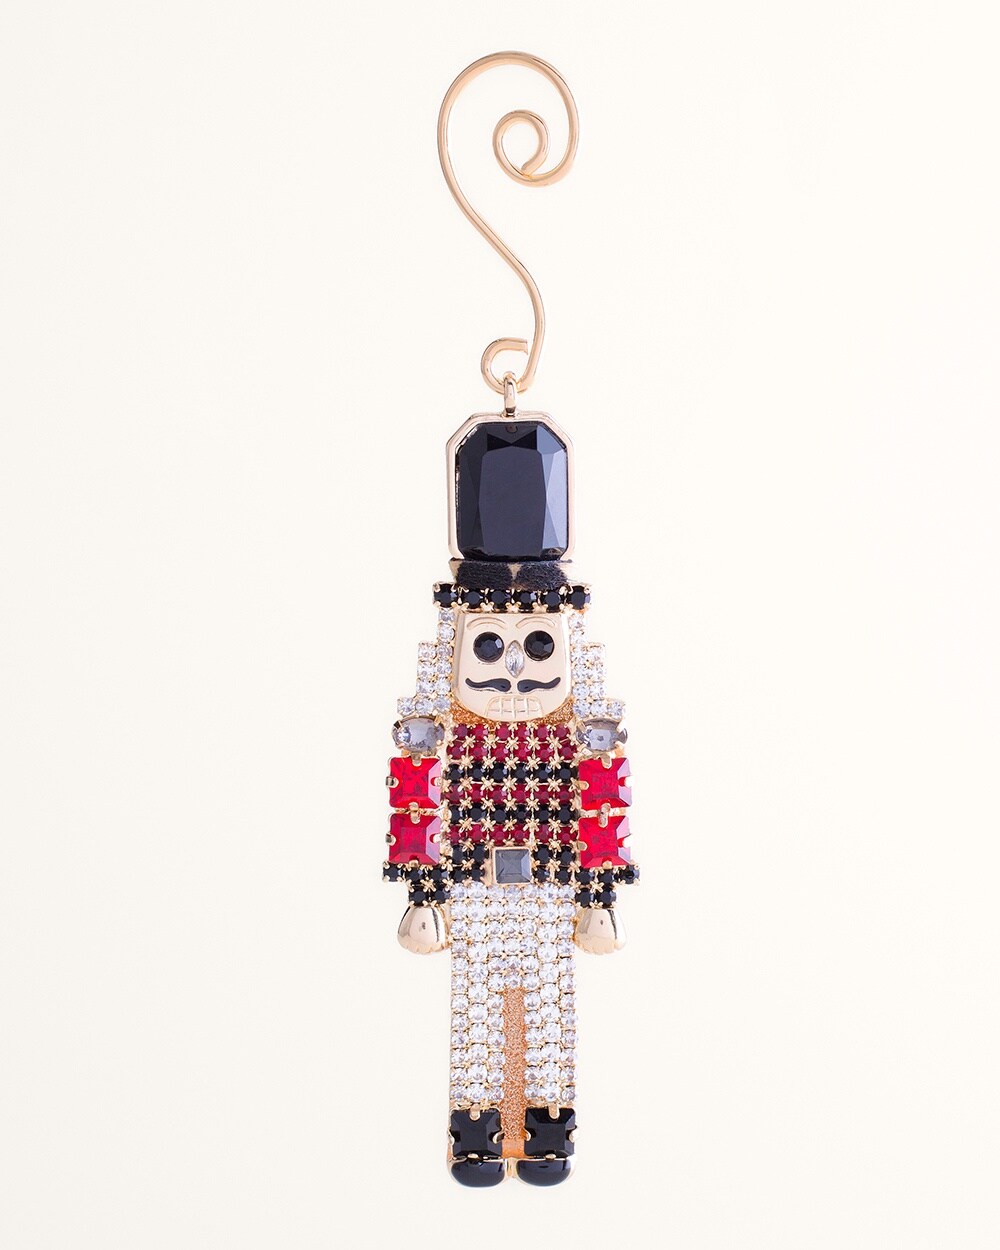 Faceted Simulated Stone Nutcracker Ornament